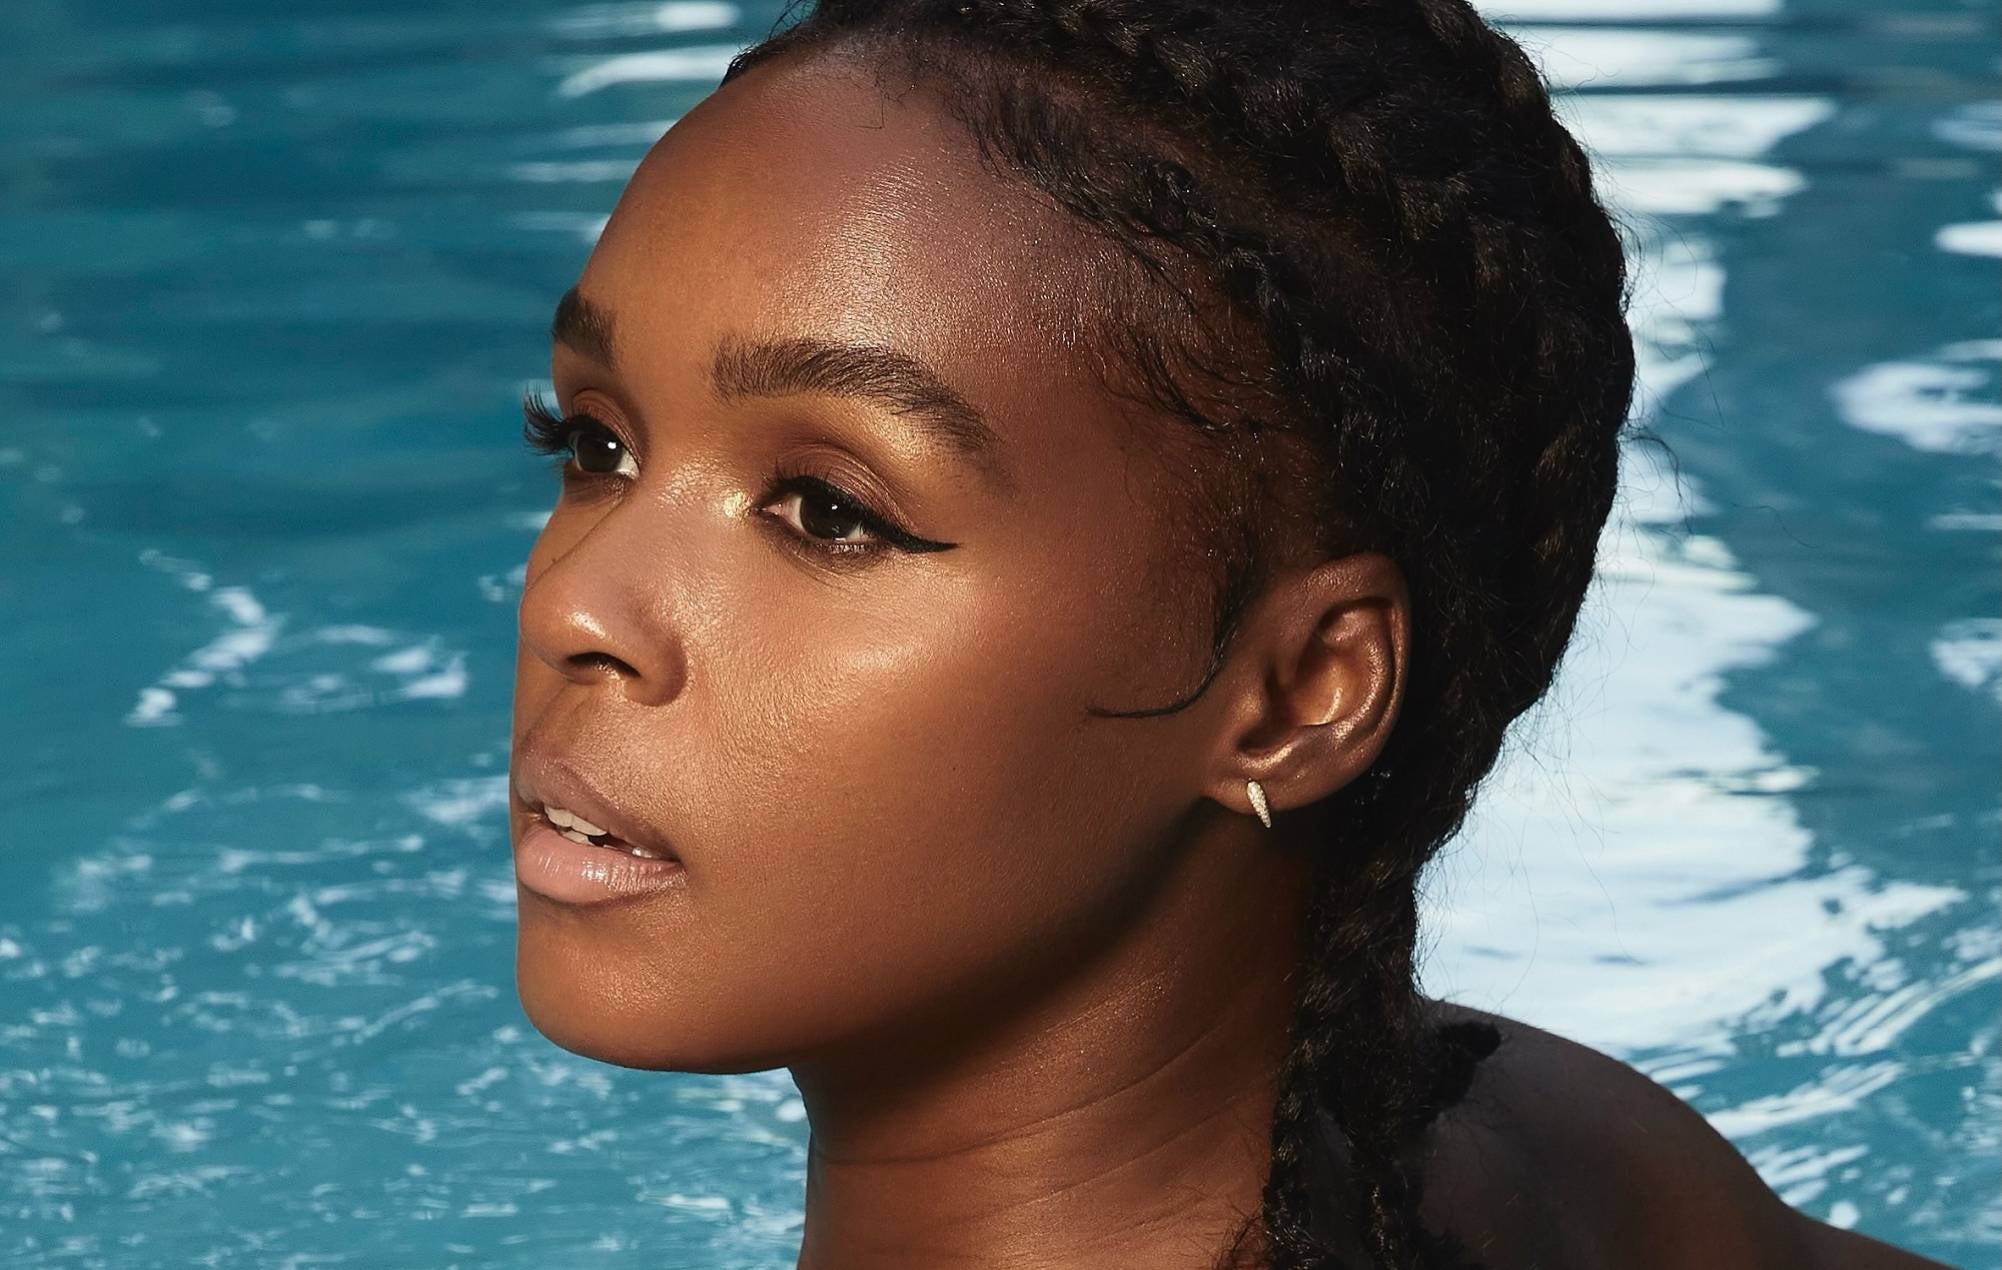 Best New Music This Week: Janelle Monáe Rises High With New Single, “Float”